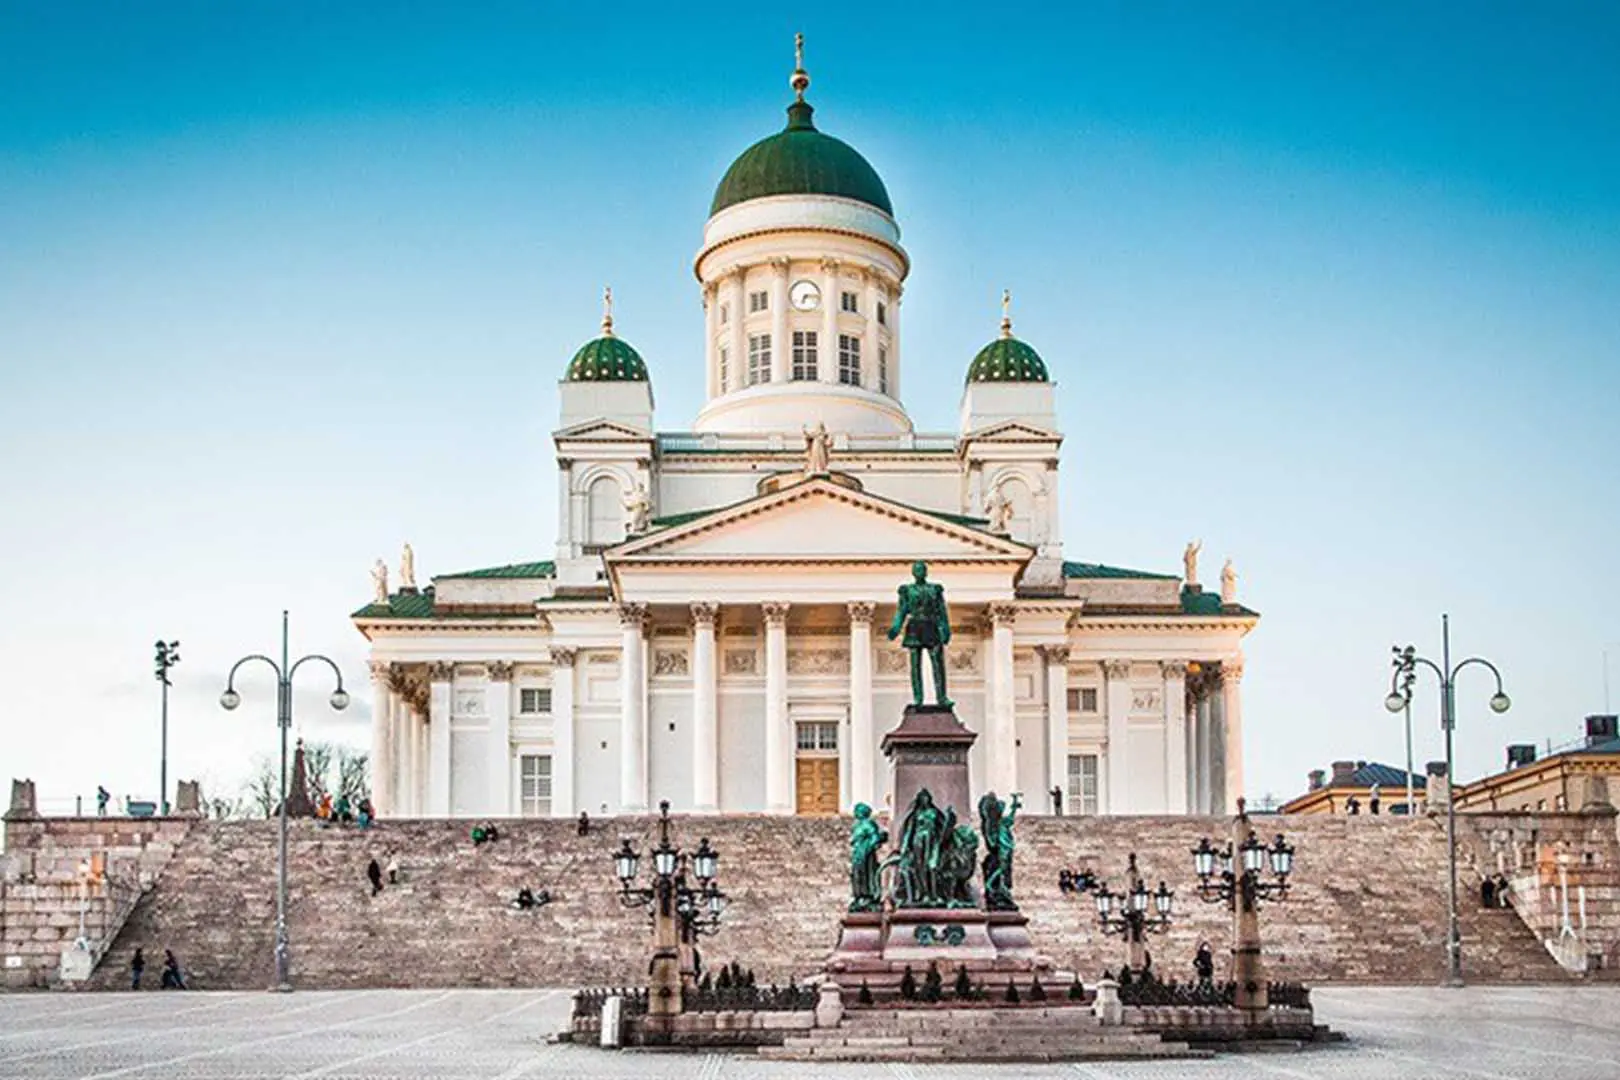 ></center></p><p>Welcome to your adventure, where you start by exploring the modern and uniquely charming Finnish capital of Helsinki, renowned for its impressive cleanliness and attention to detail.</p><p><center><a href=